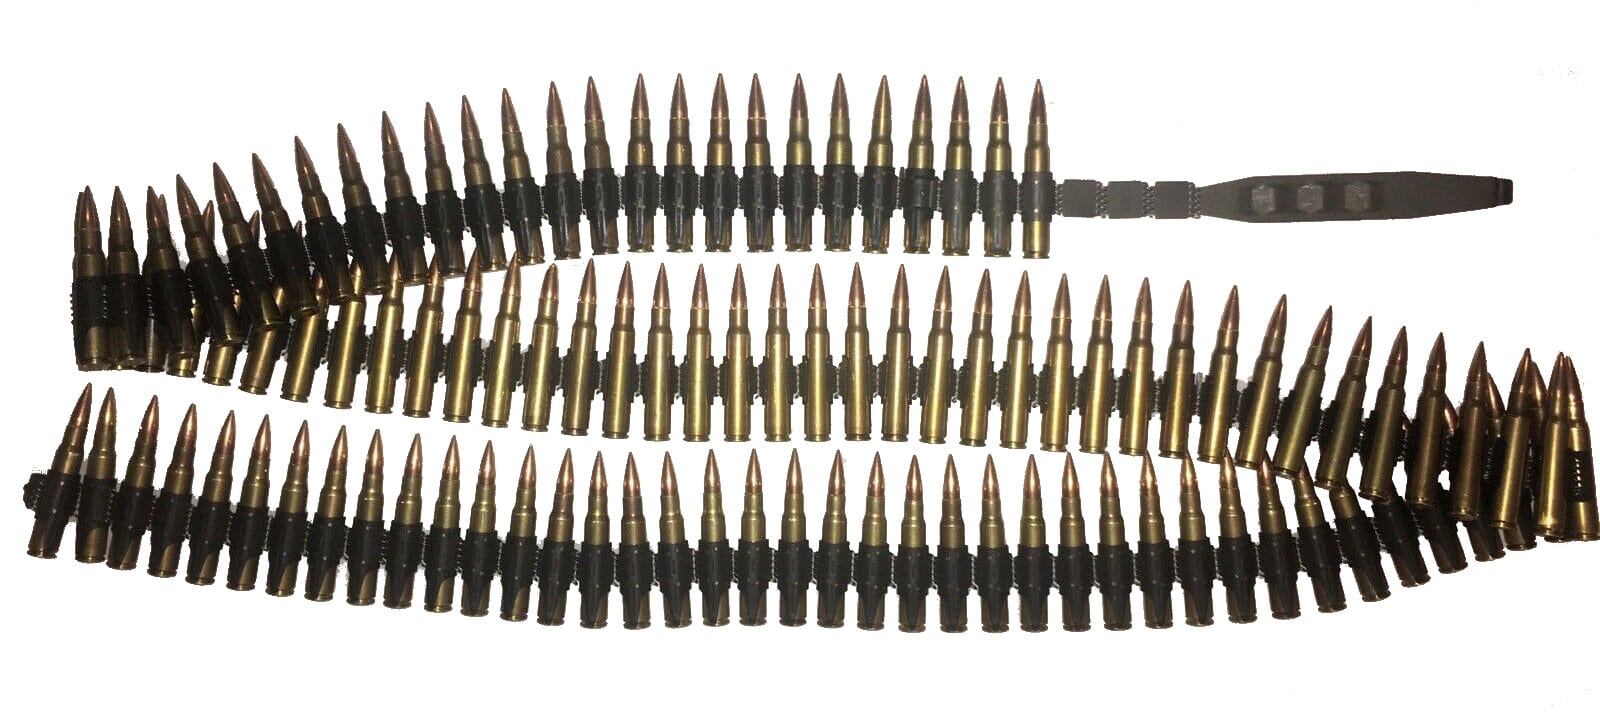 MG-42 Linked 8mm Mauser (MG34/42) - Snap Caps Dummy Rounds ...